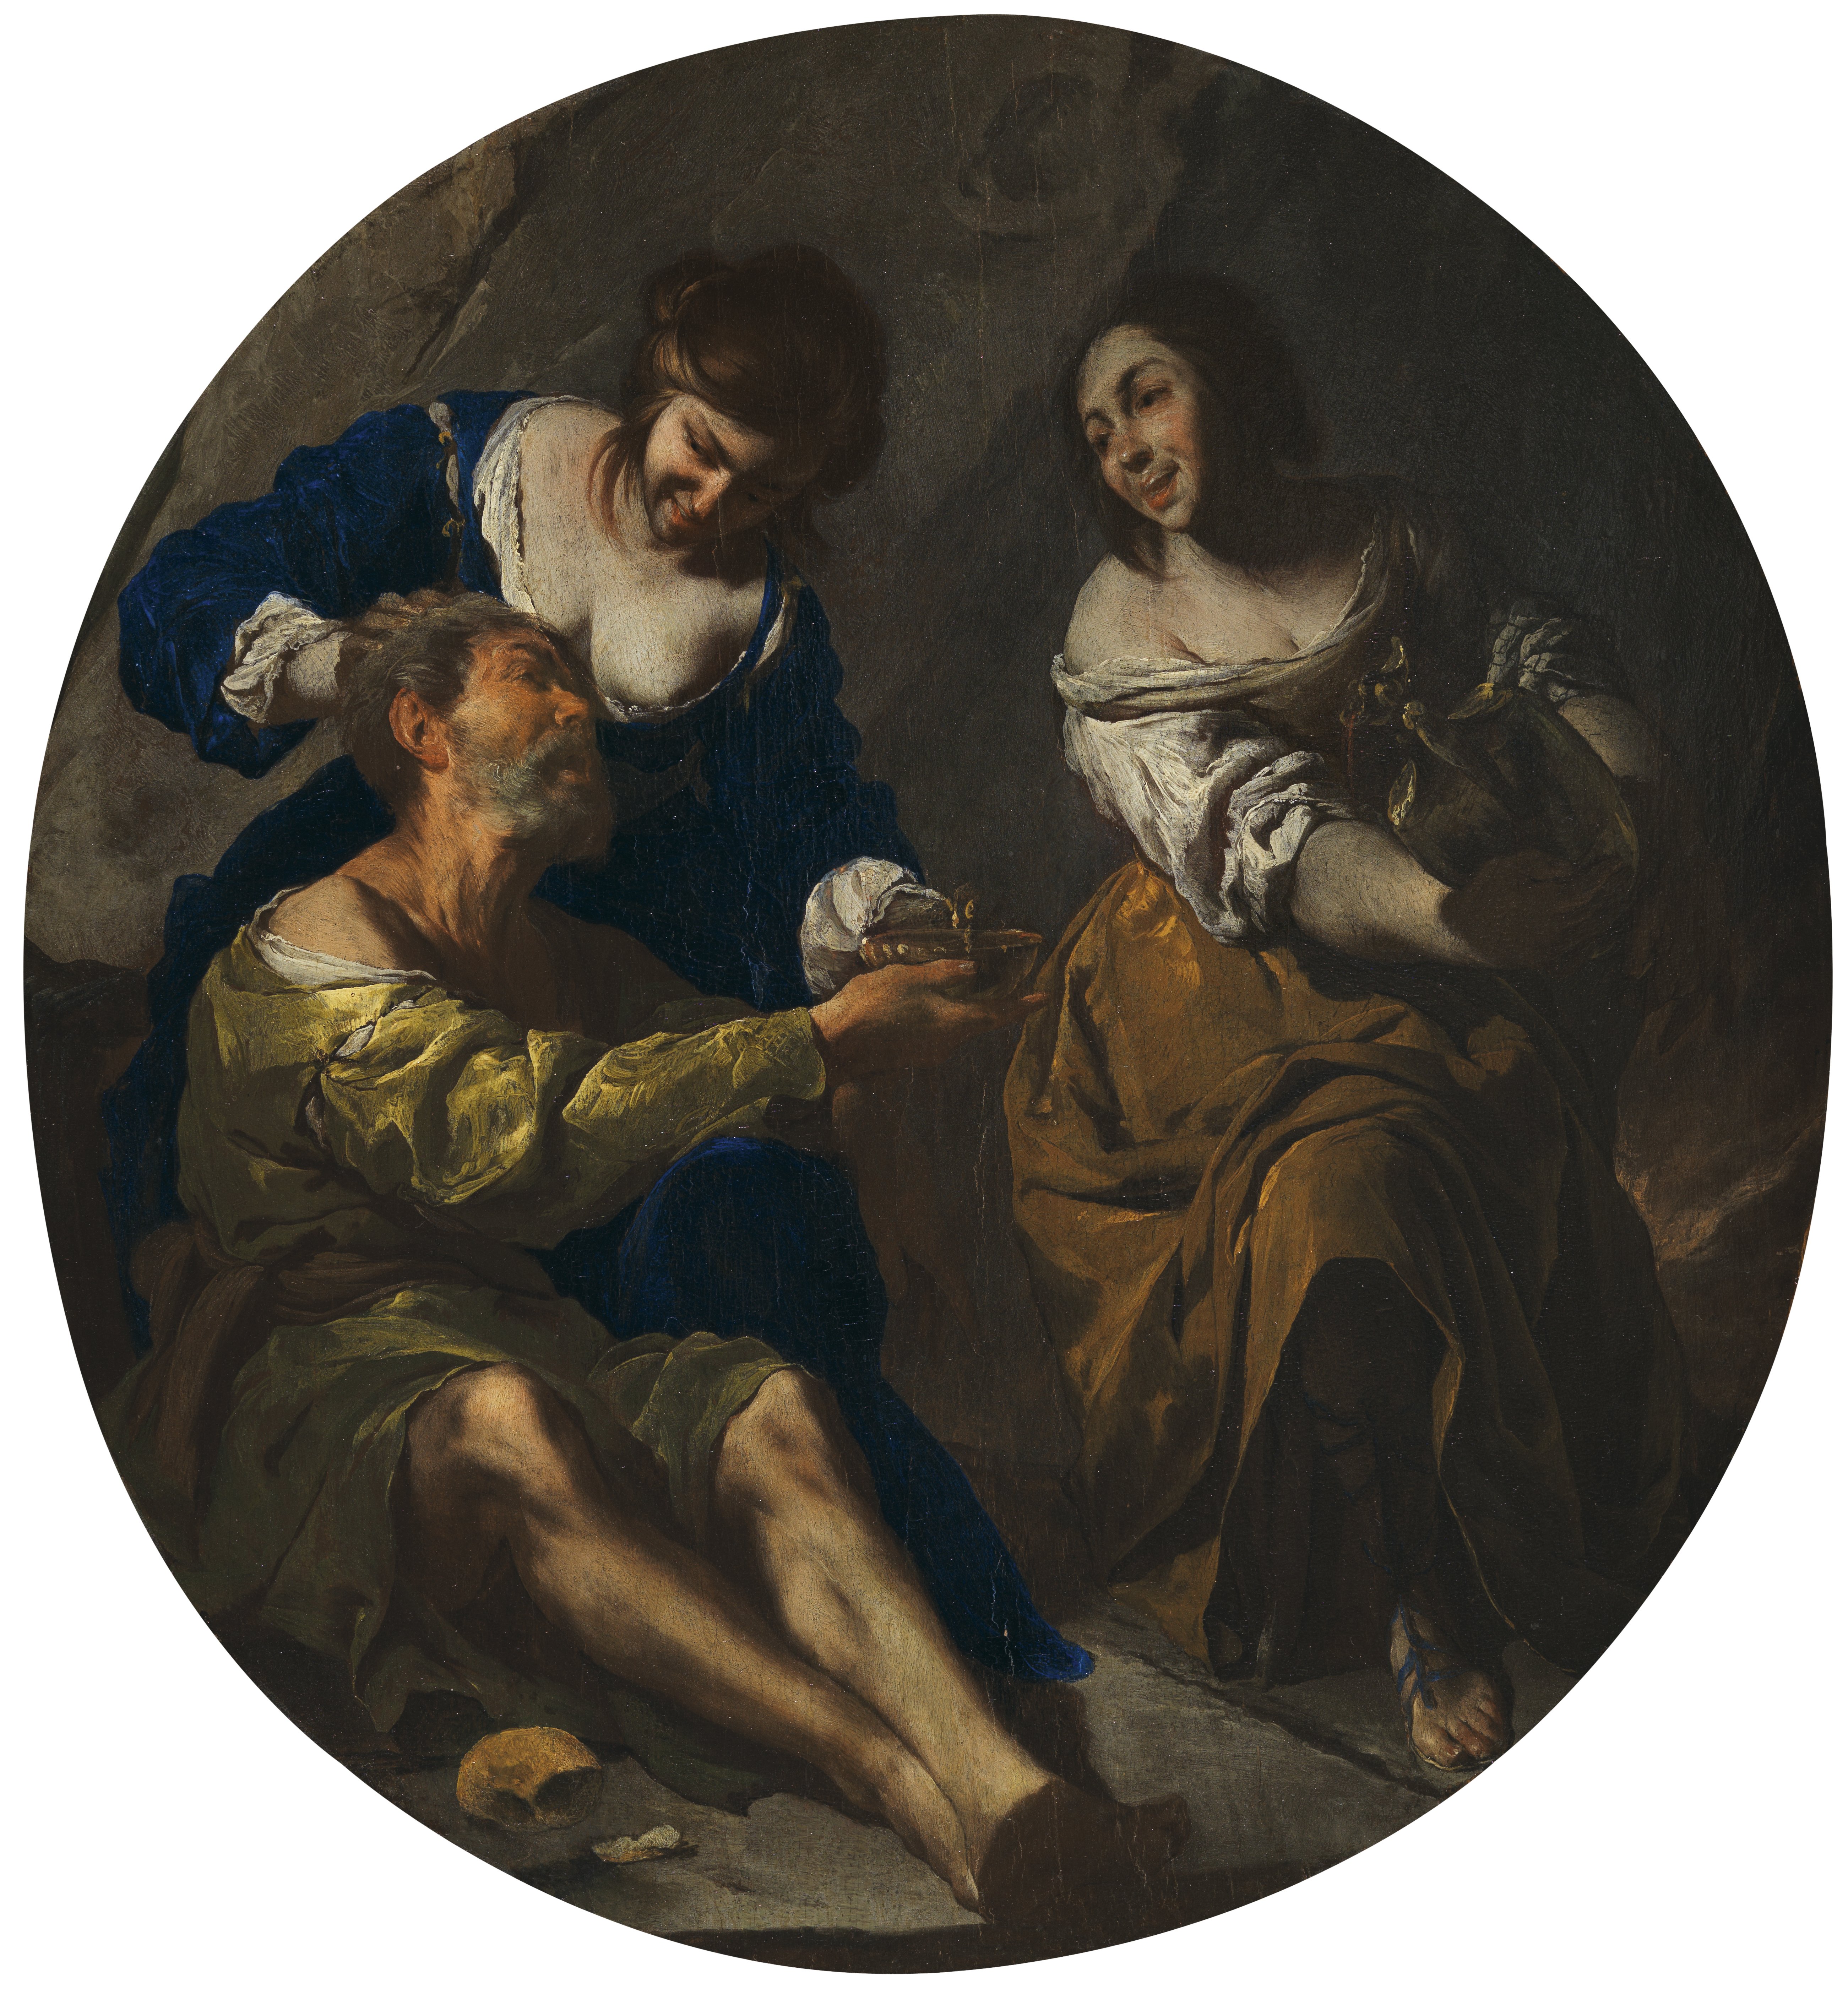 Lot and his Daughters. Lot y sus hijas, c. 1640-1645